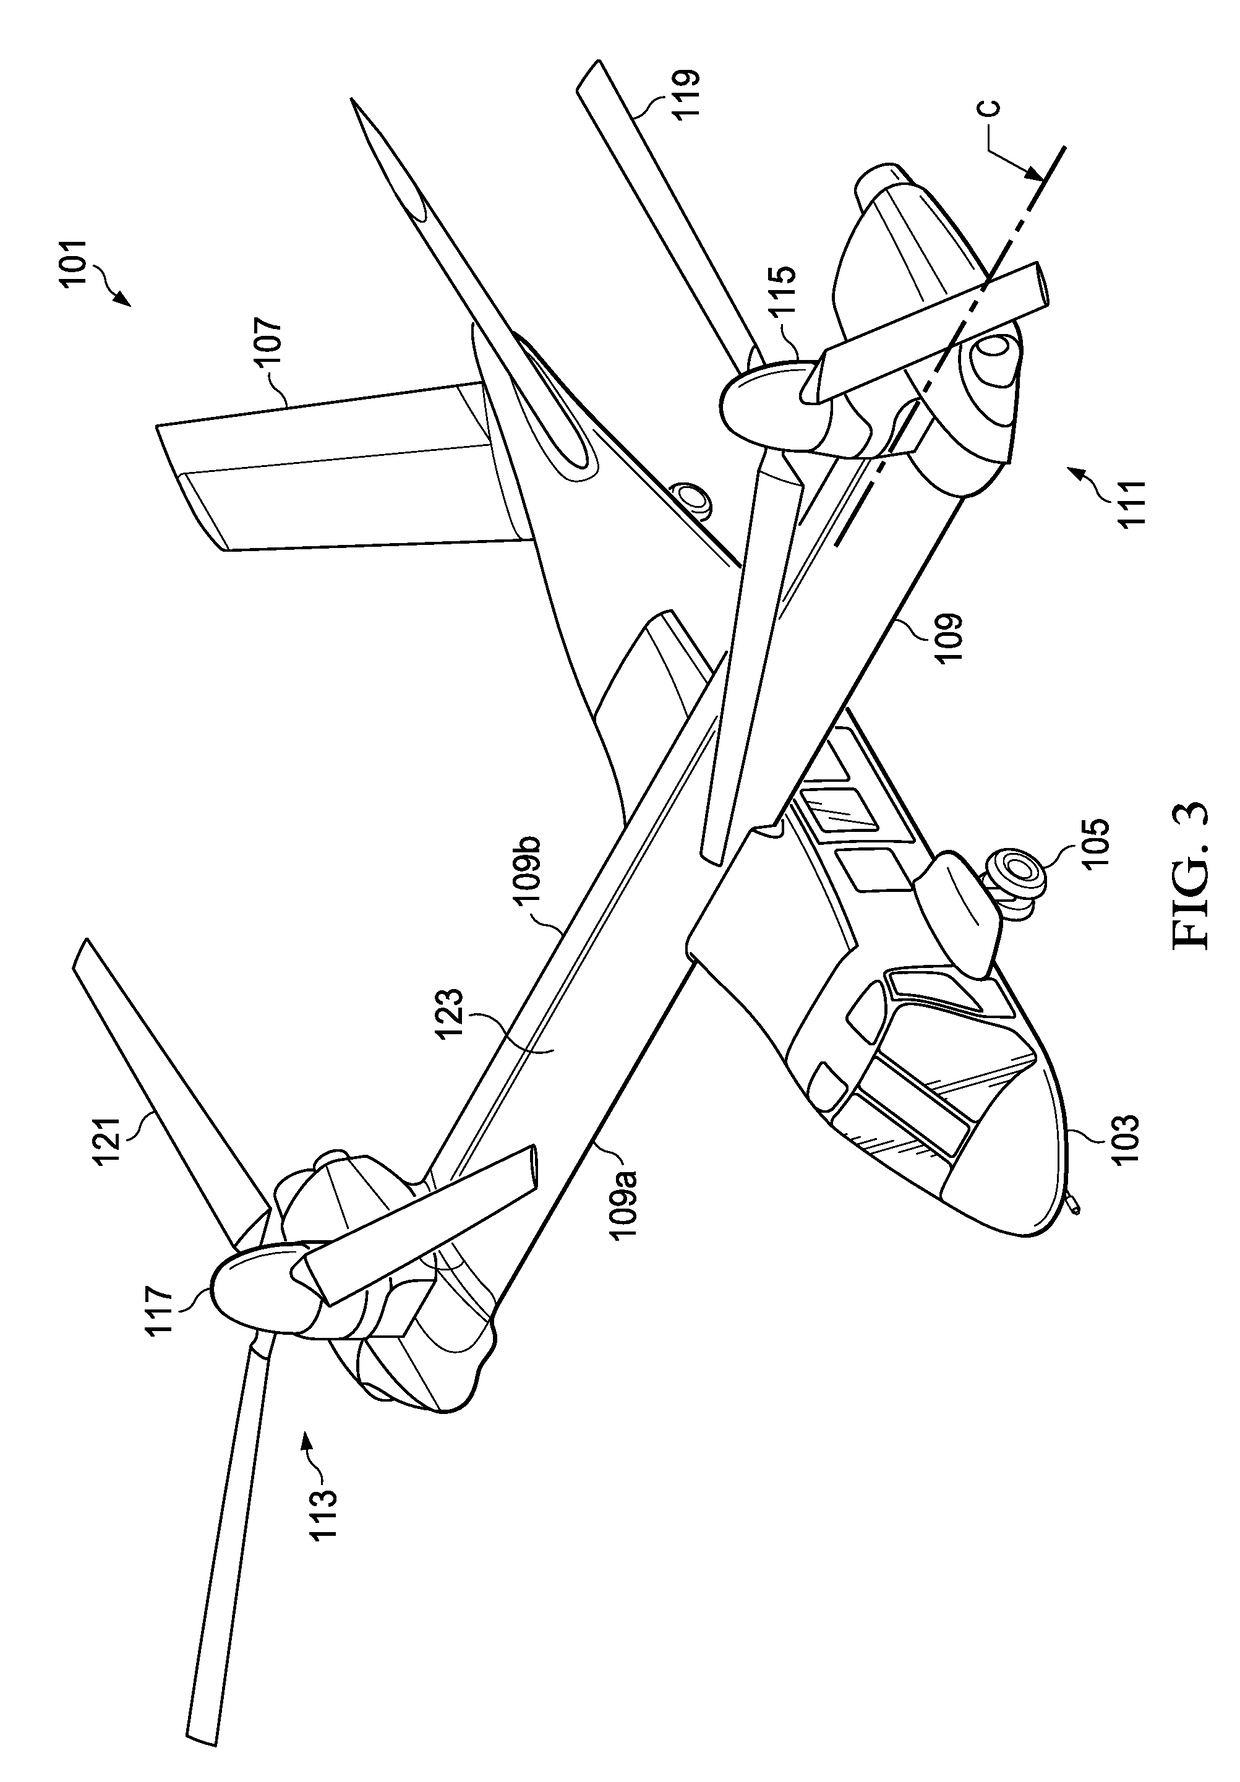 Composite wing structure and methods of manufacture